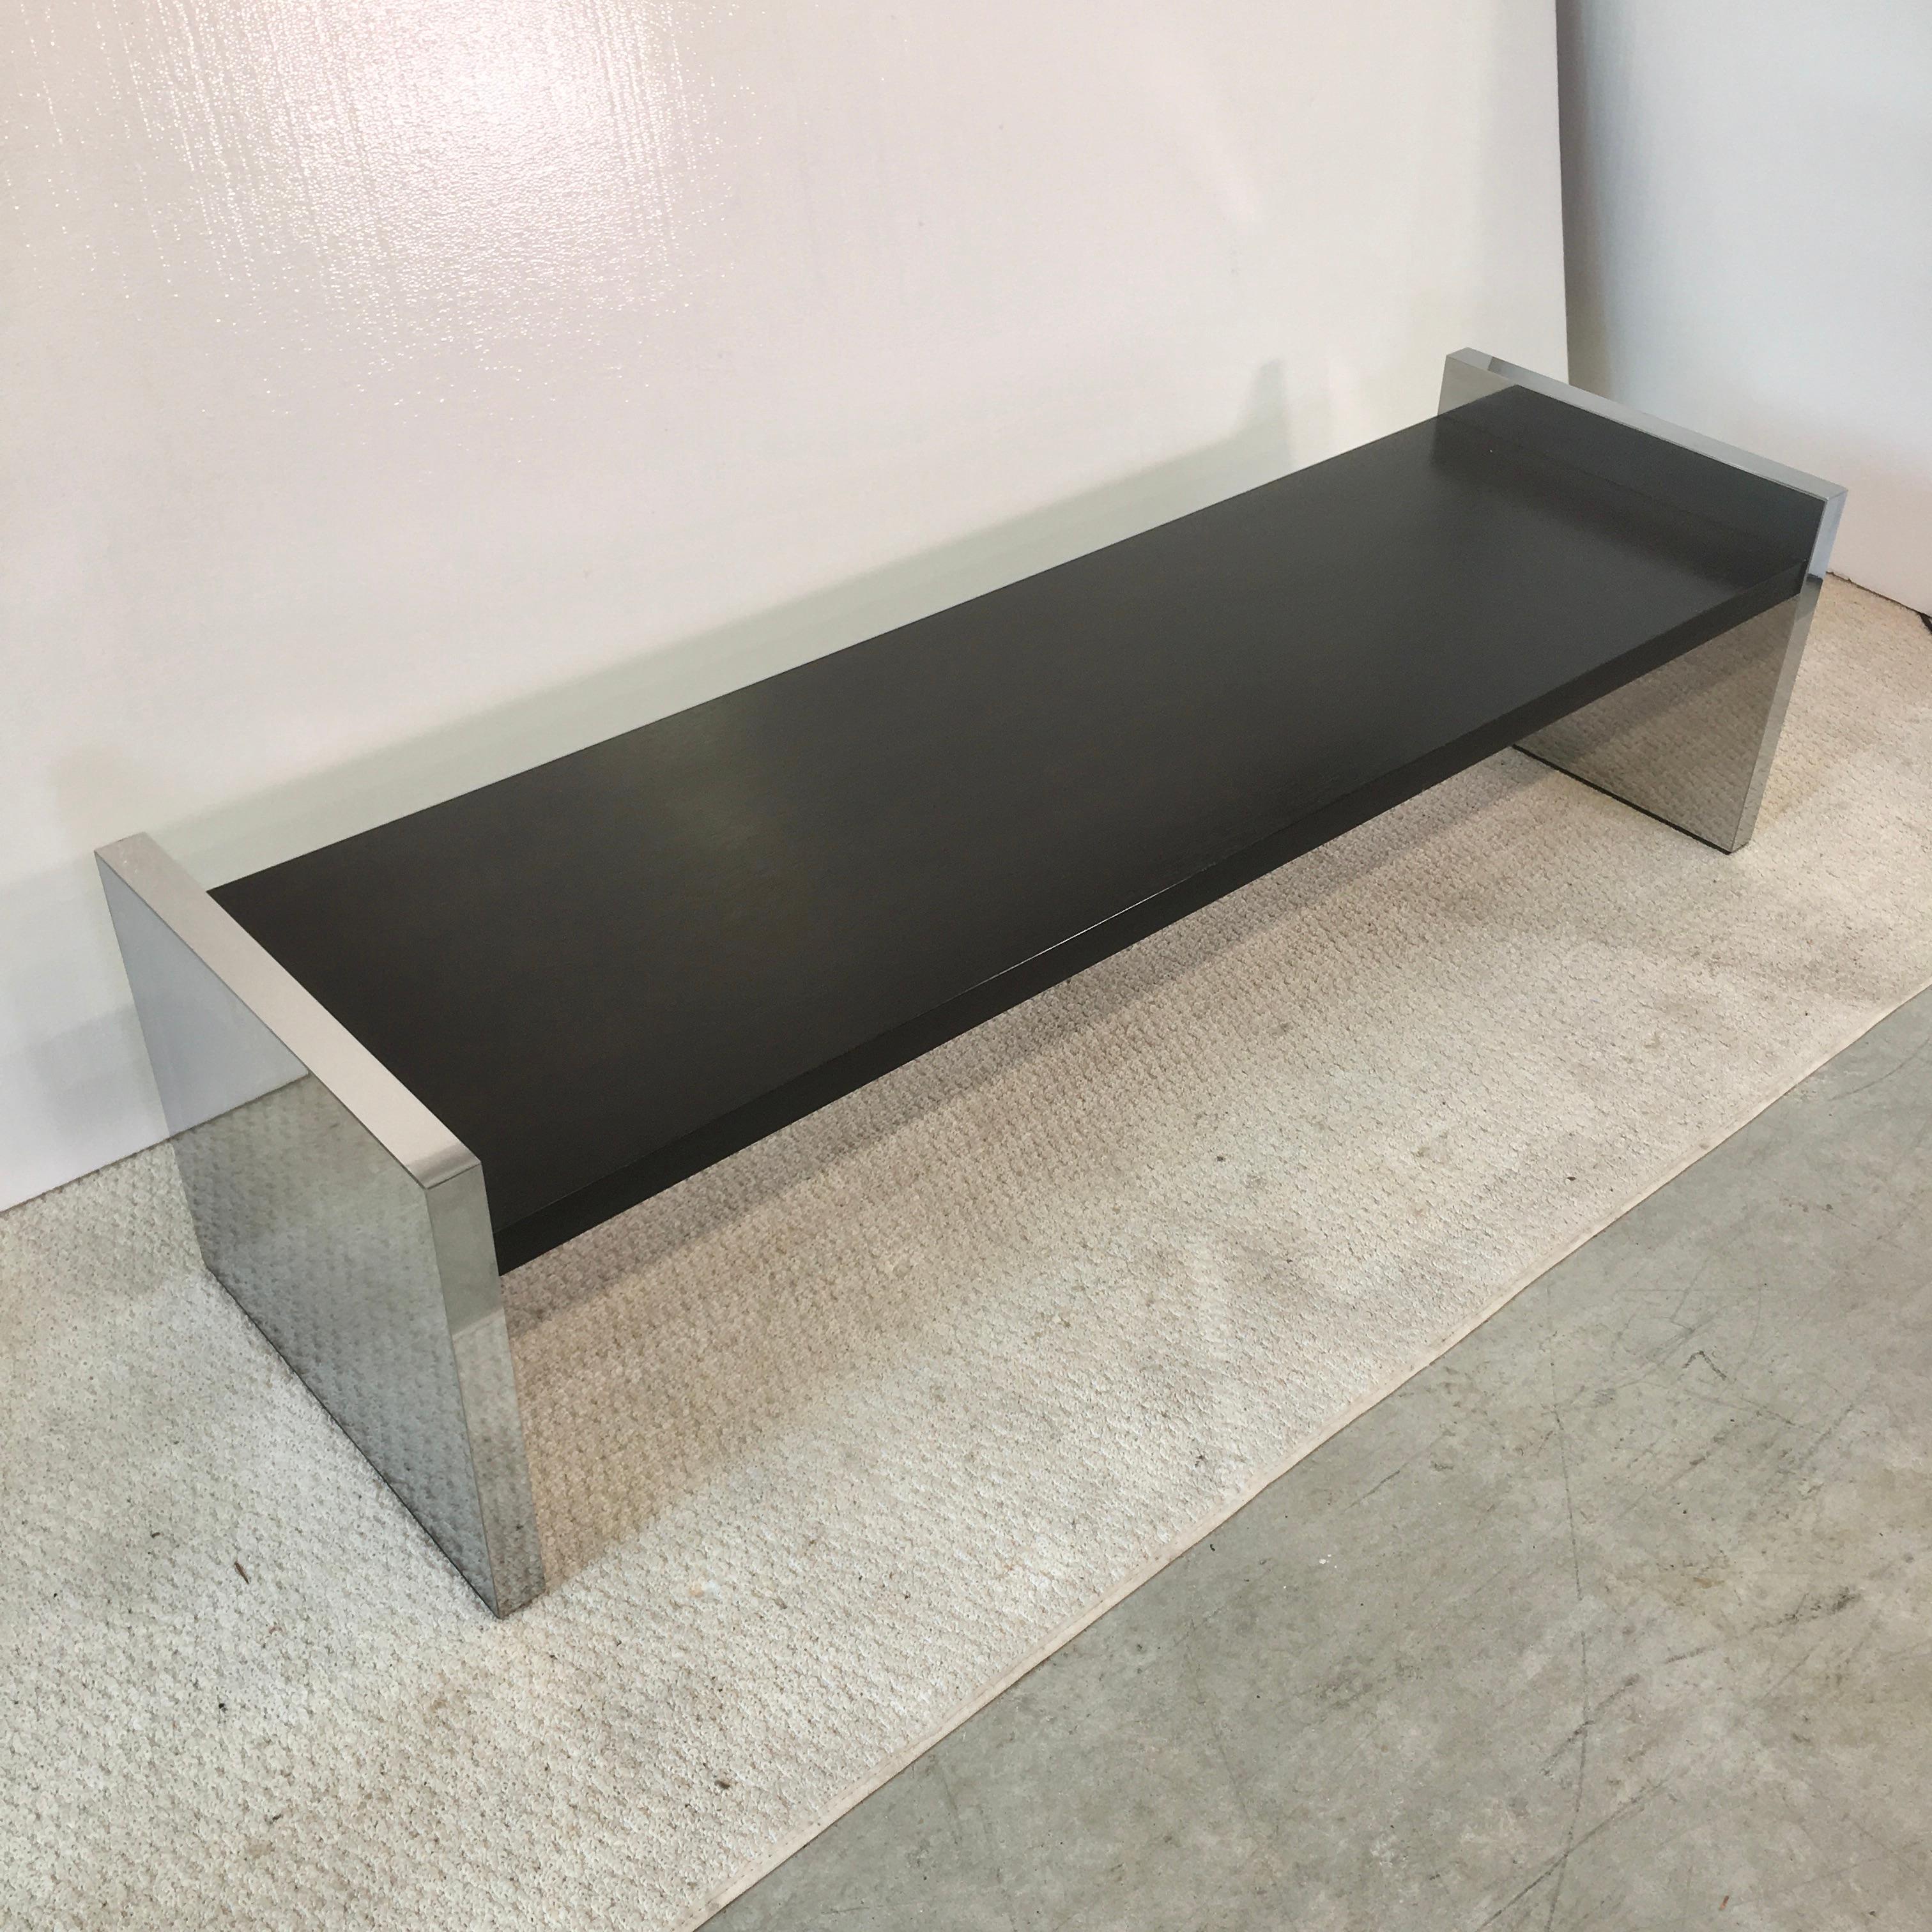 This is the 60 inch long version of this bench (or table) designed by Roger Sprunger for Dunbar circa 1970. Ebonized solid oak between two mirror polished stainless steel clad slab sides. Dunbar metal tag on underside Hand polished and ready to